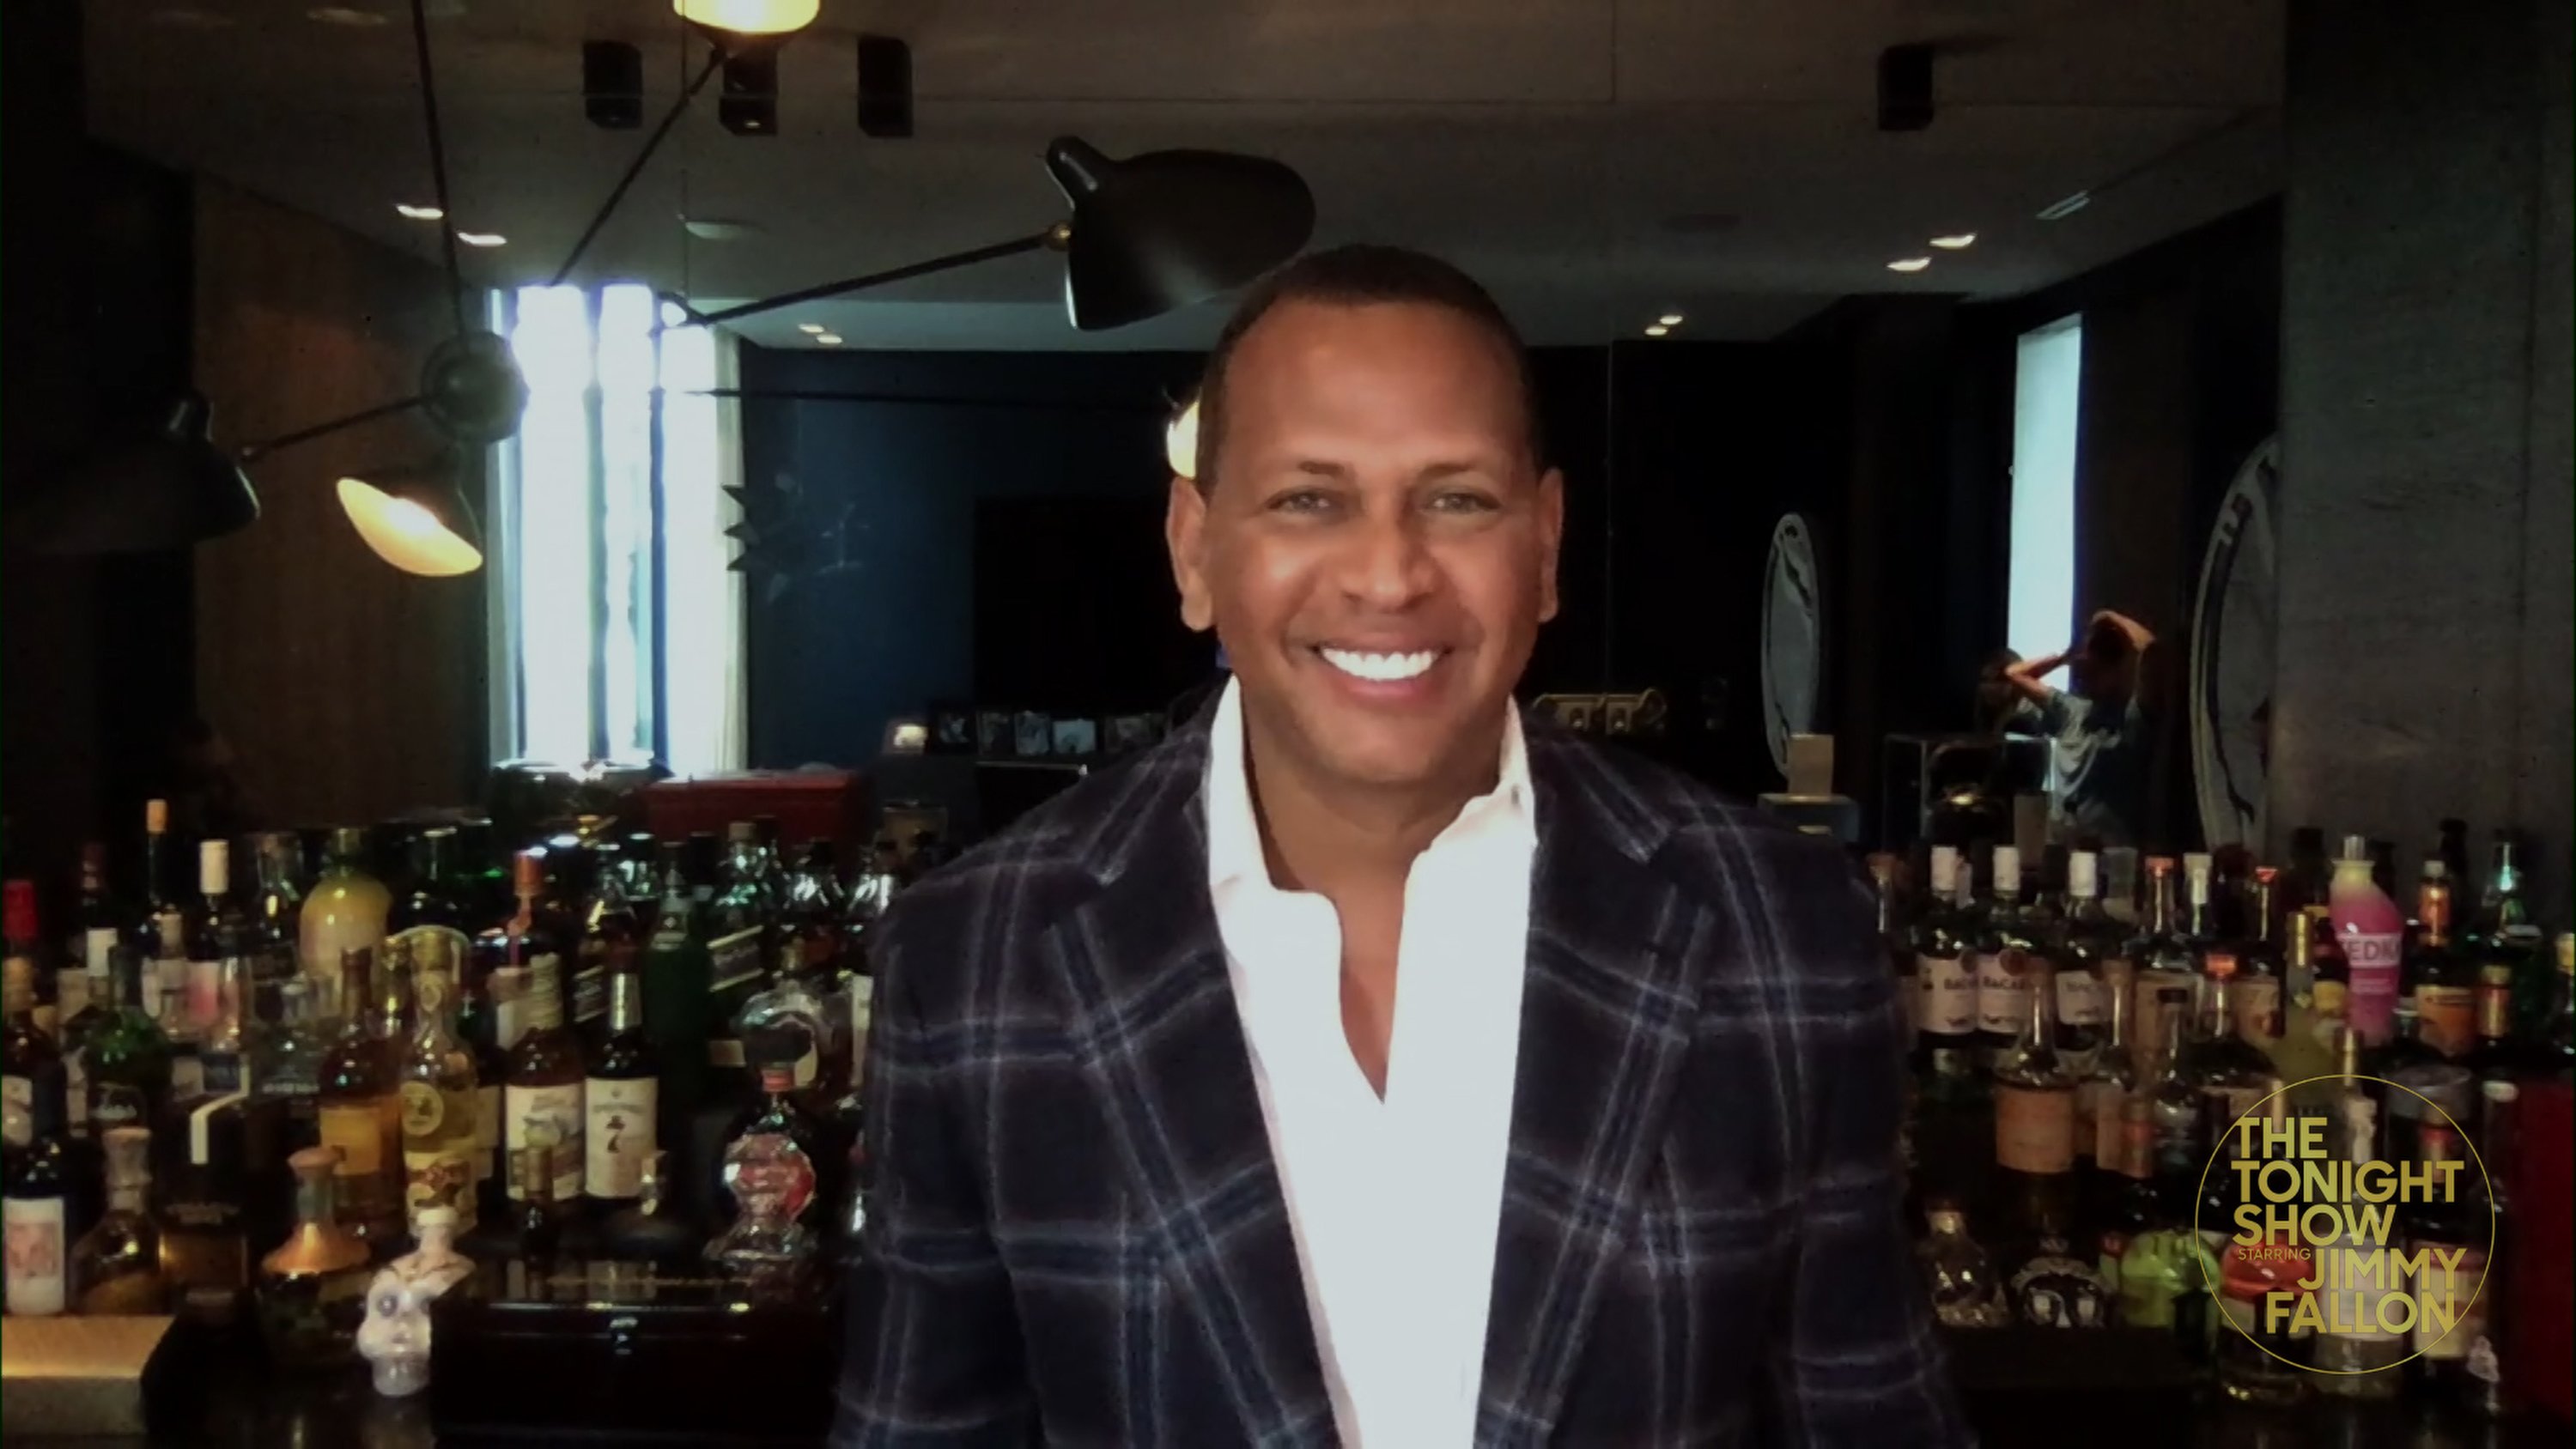 Alex Rodriguez Launches His Own Makeup Line After Trying Jennifer Lopez’s Beauty Products